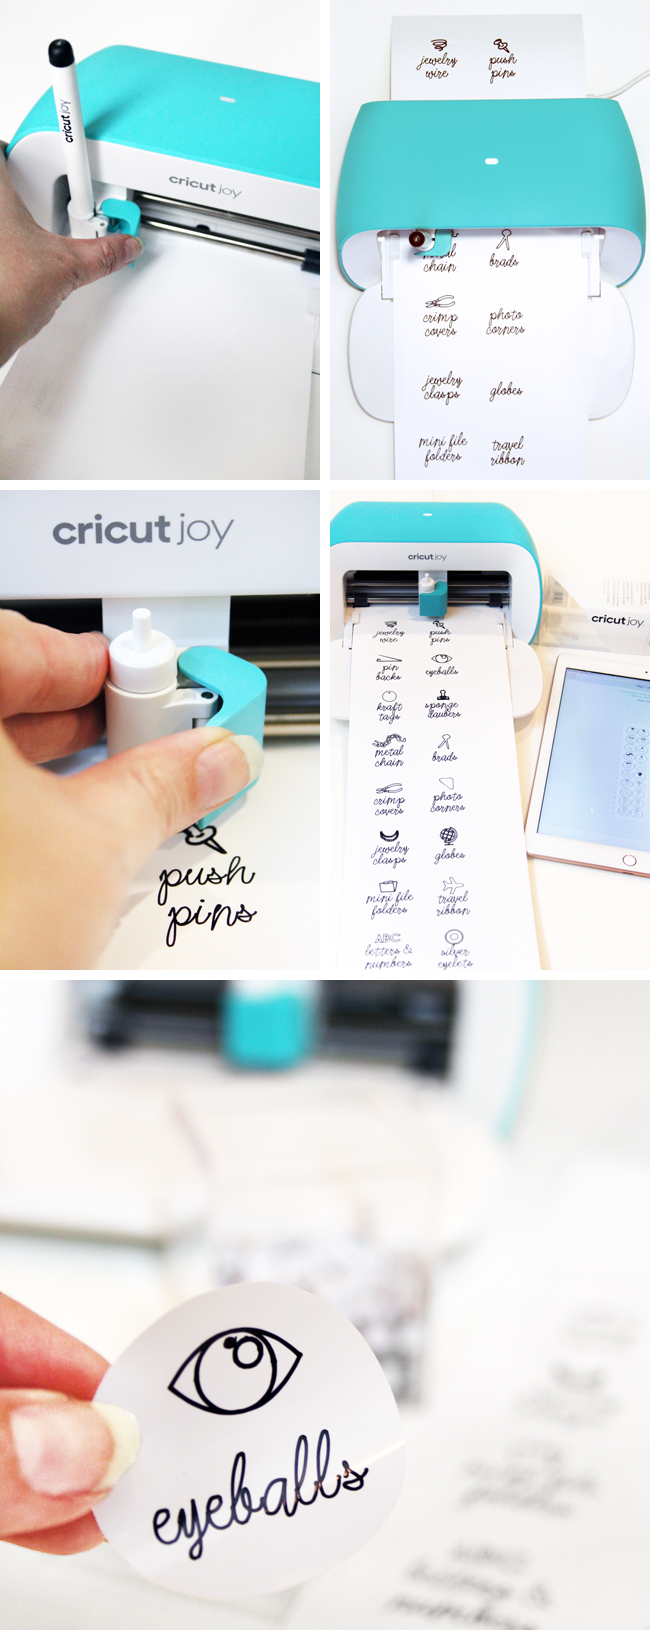 How to Make Stickers Using the Cricut Joy